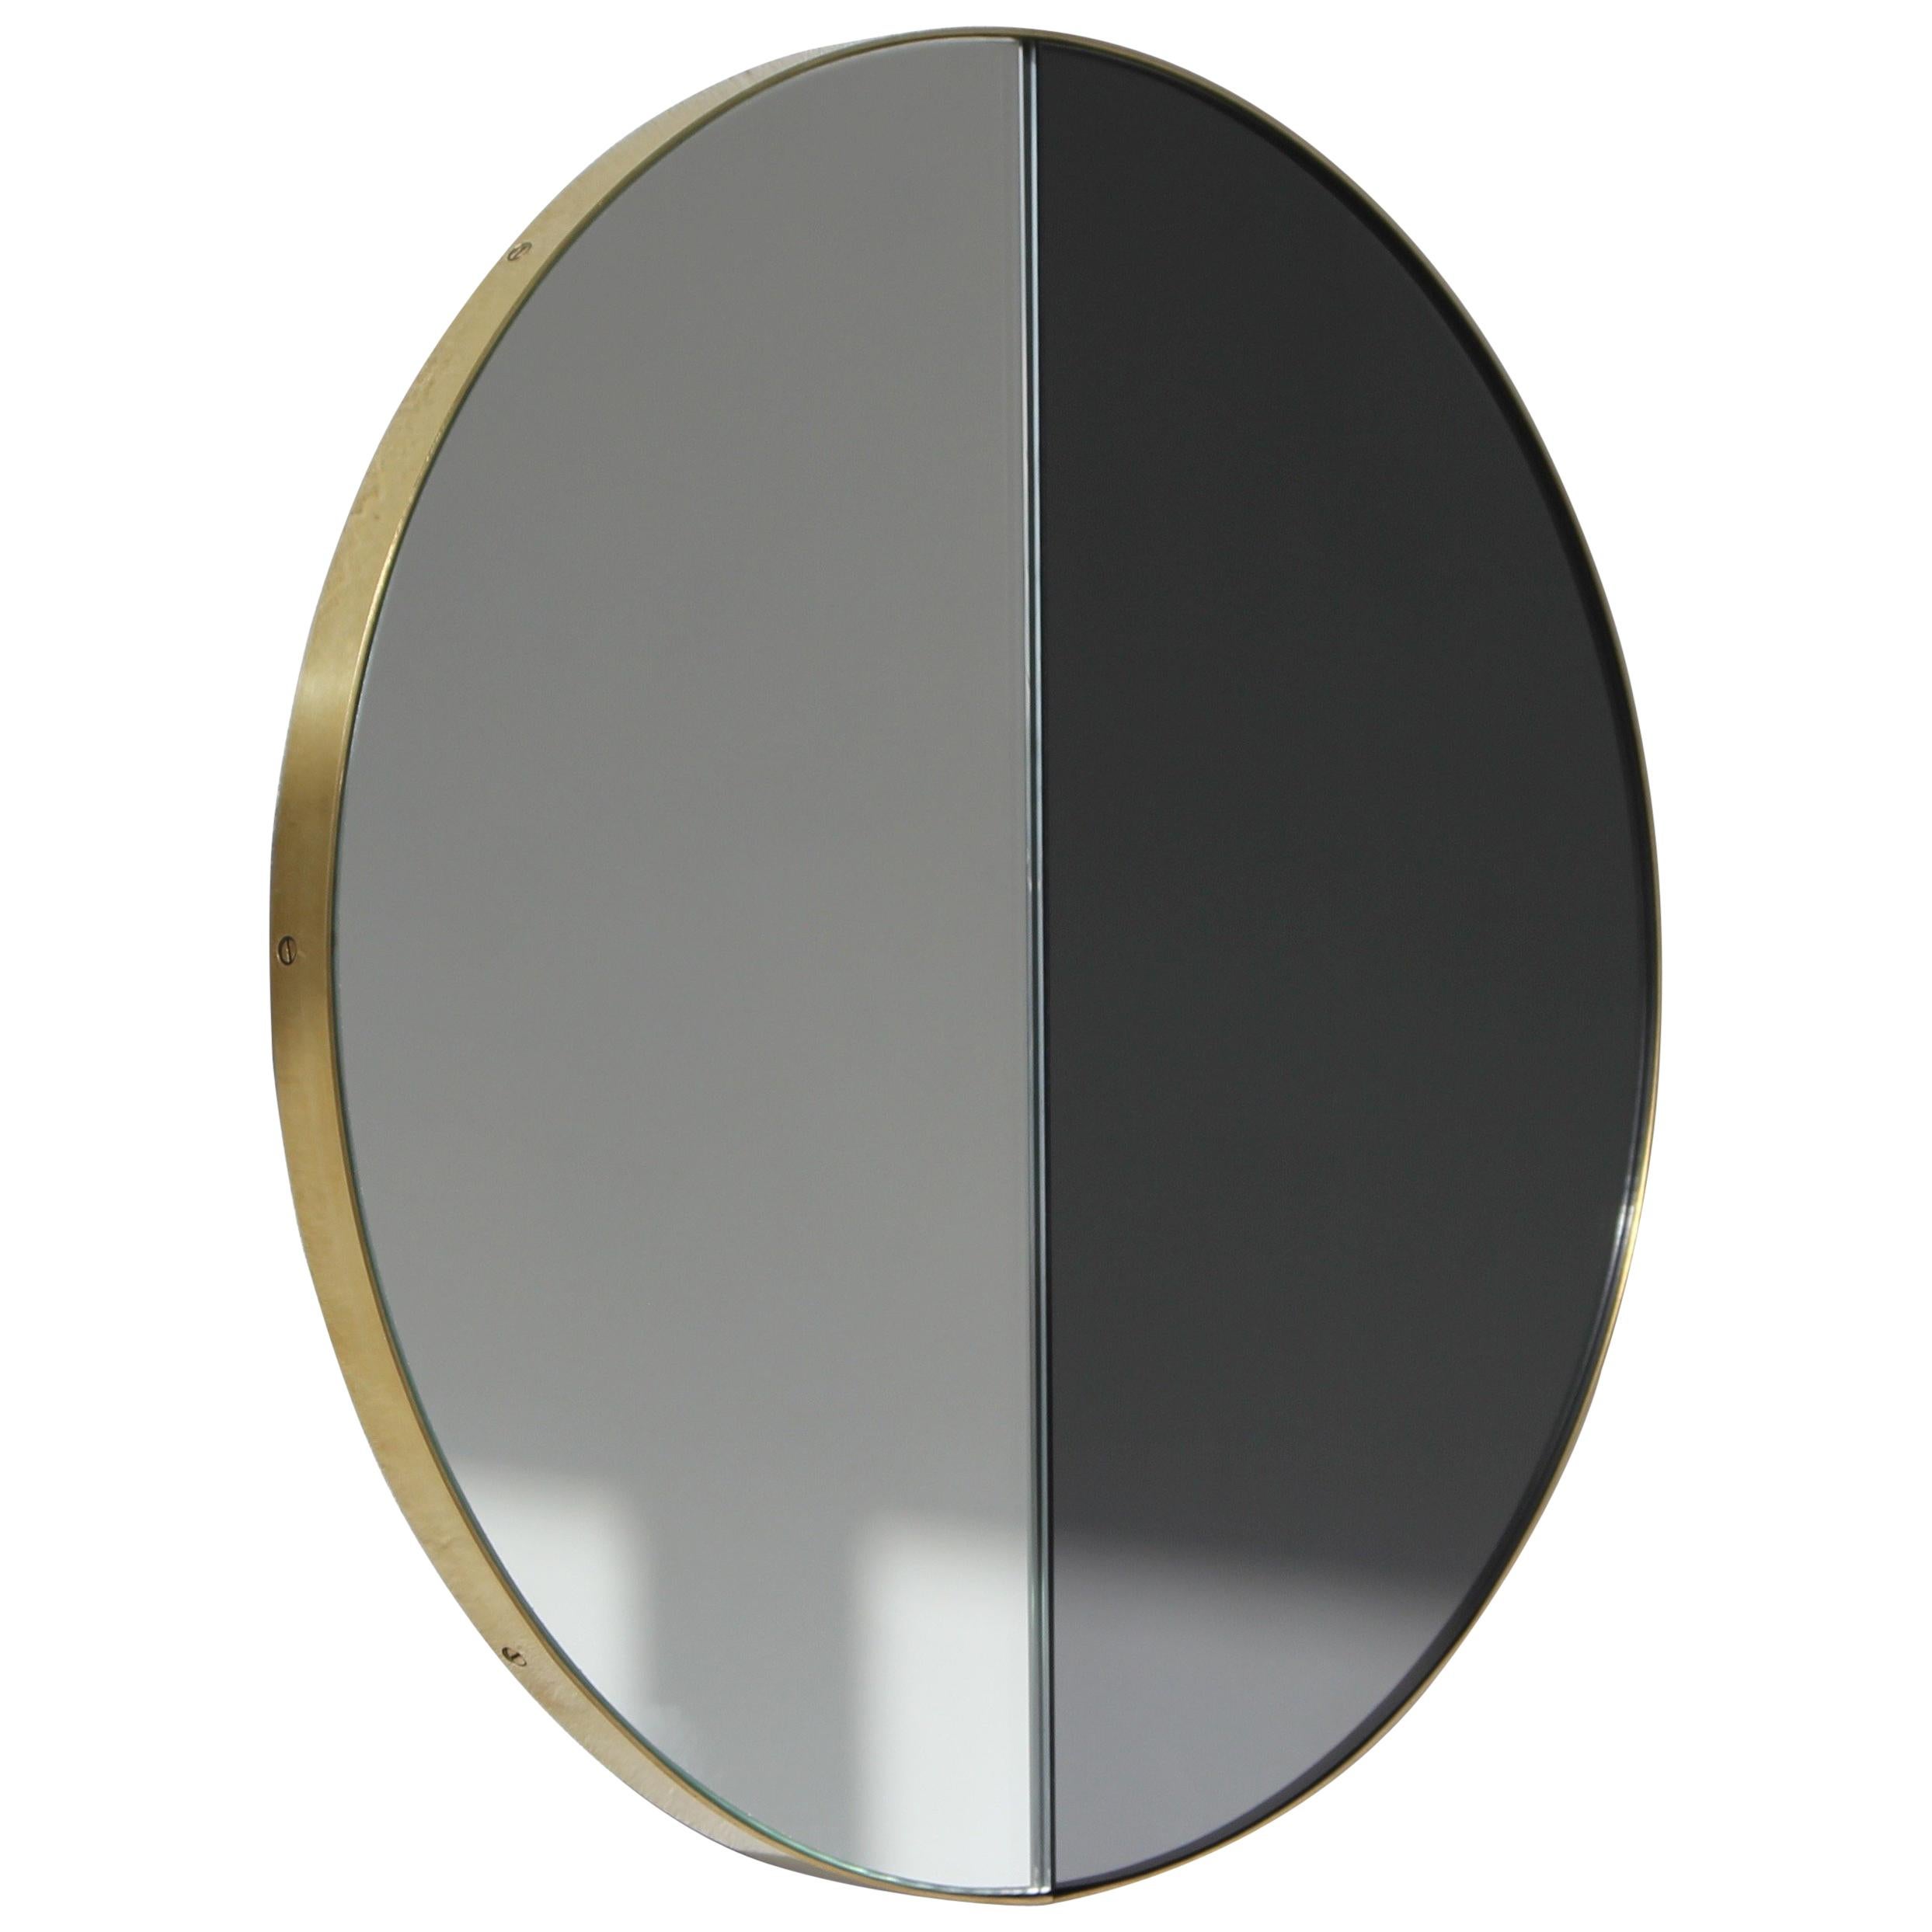 Orbis Dualis Mixed Tint Contemporary Round Mirror with Brass Frame, Medium For Sale